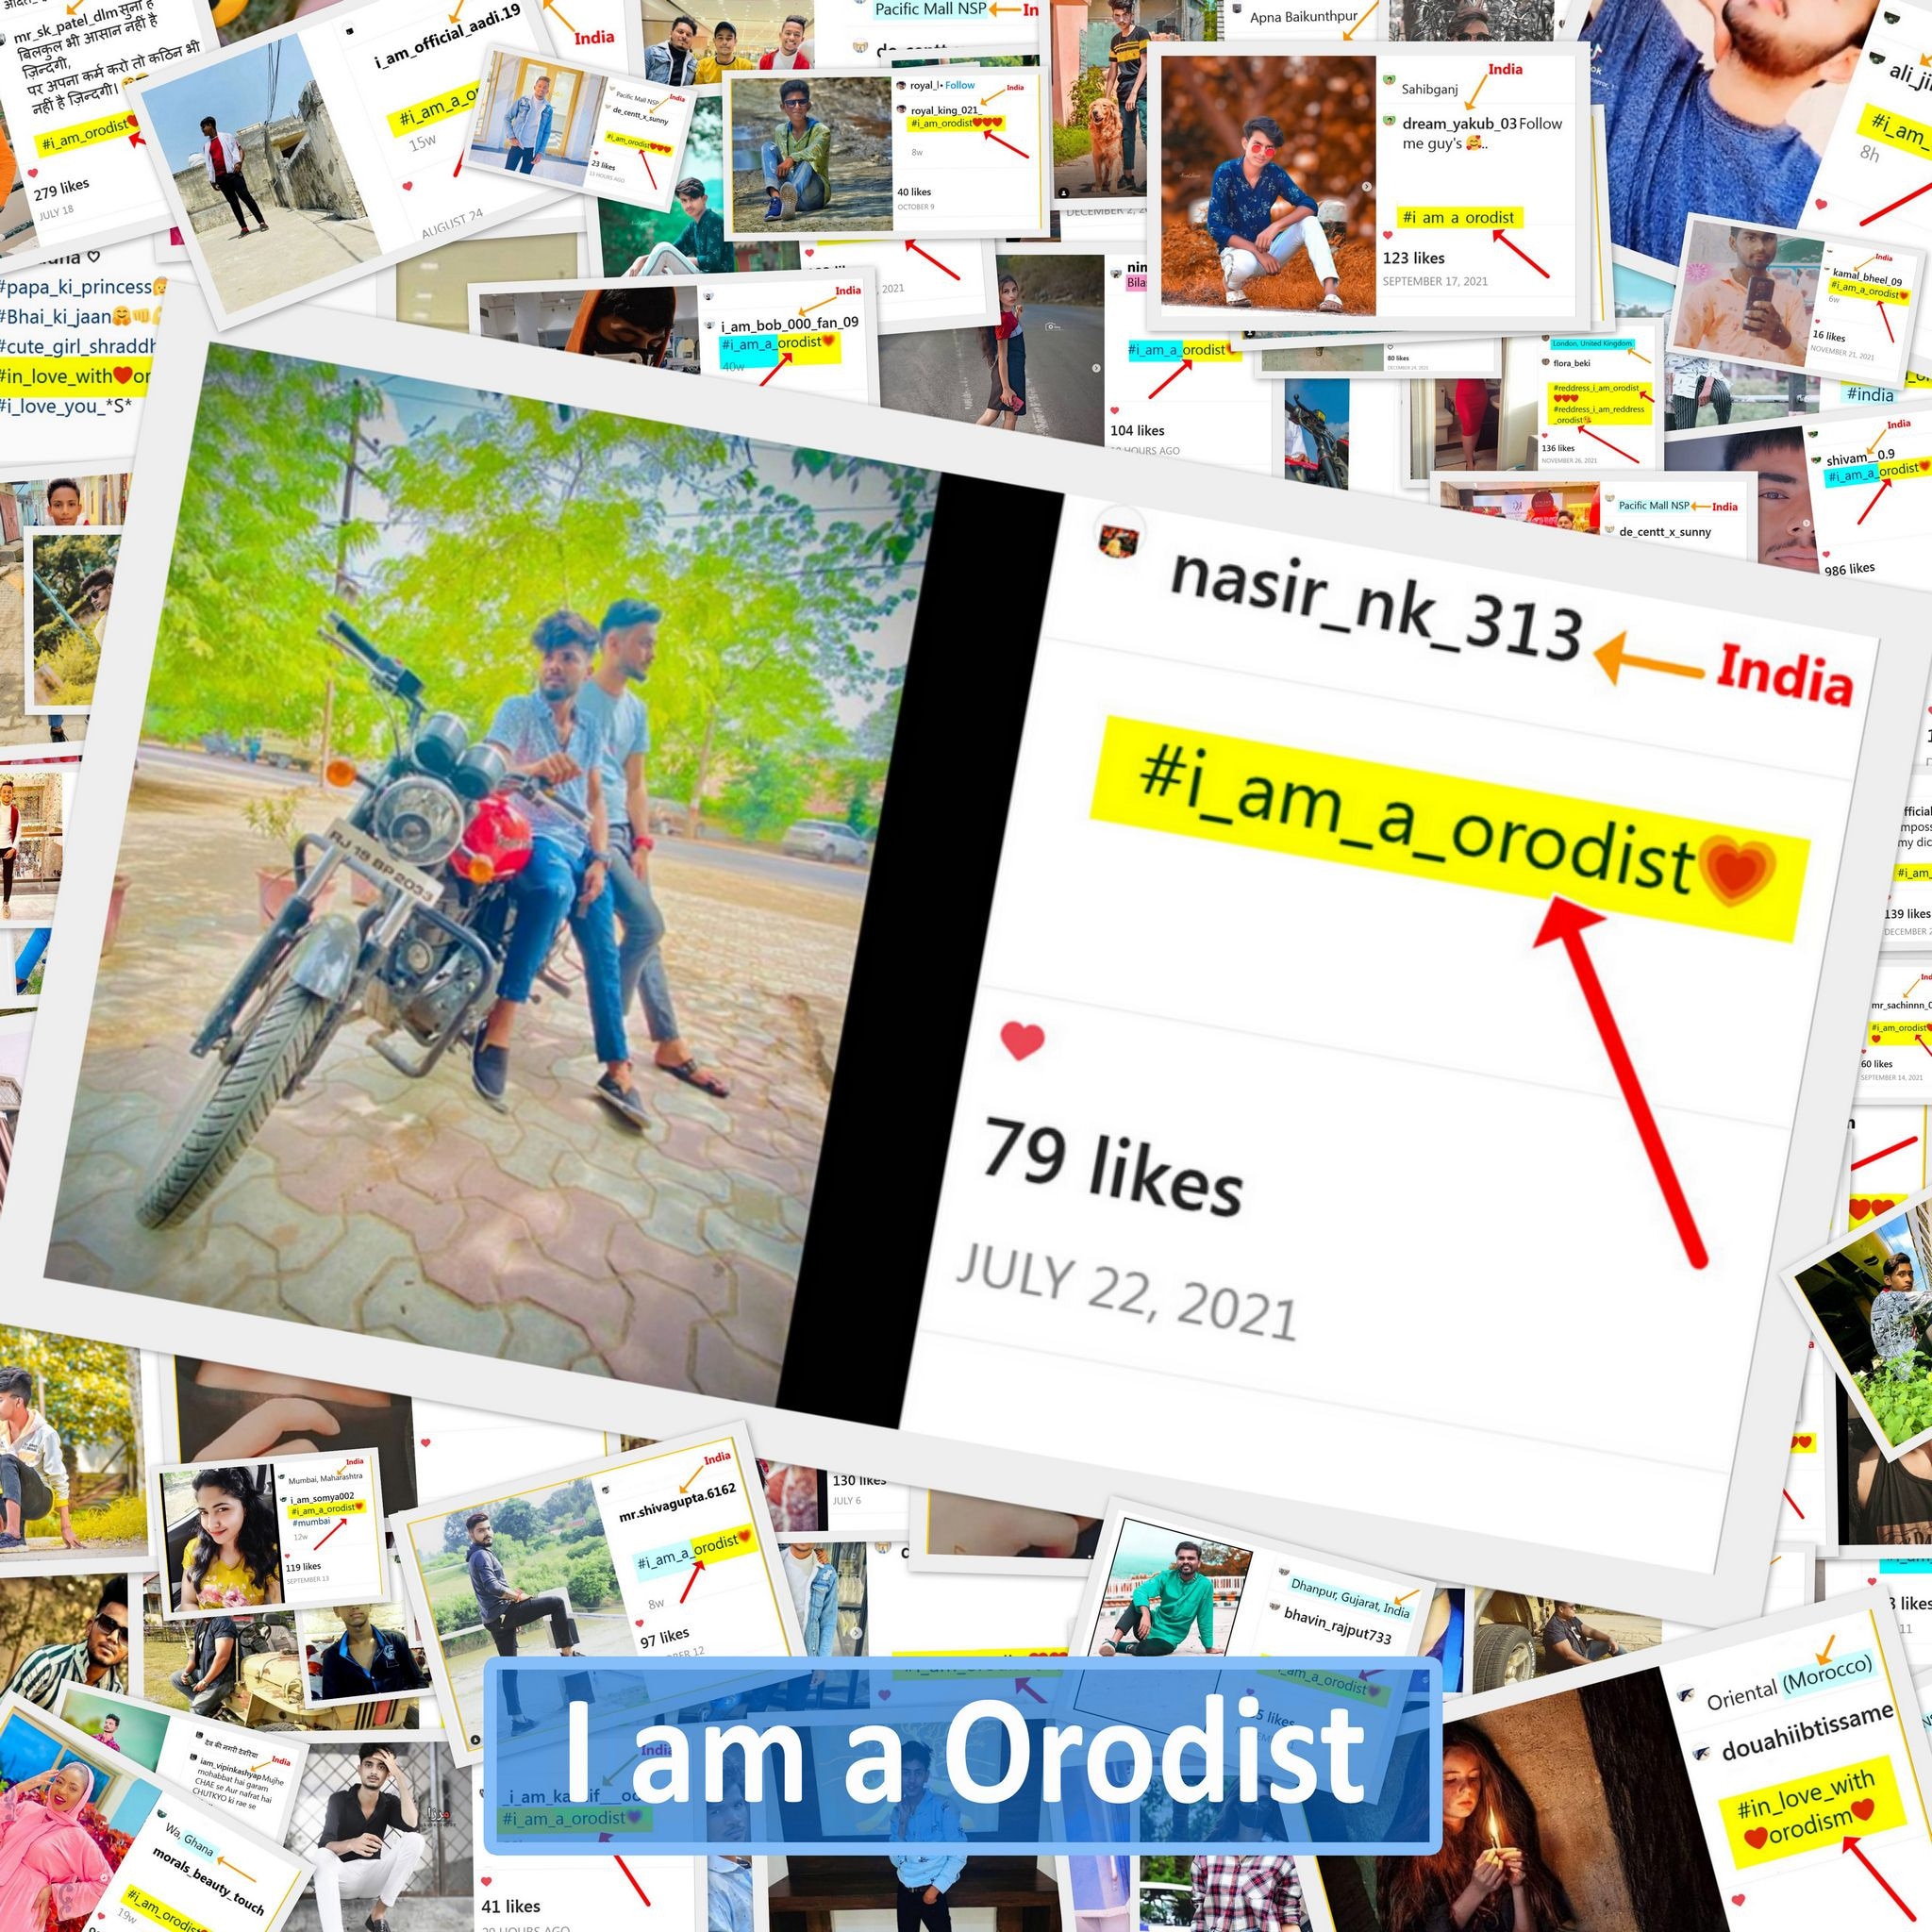  The philosophy of Orodism in India 0c7797e7564a2cfaefad6589f5c1241d